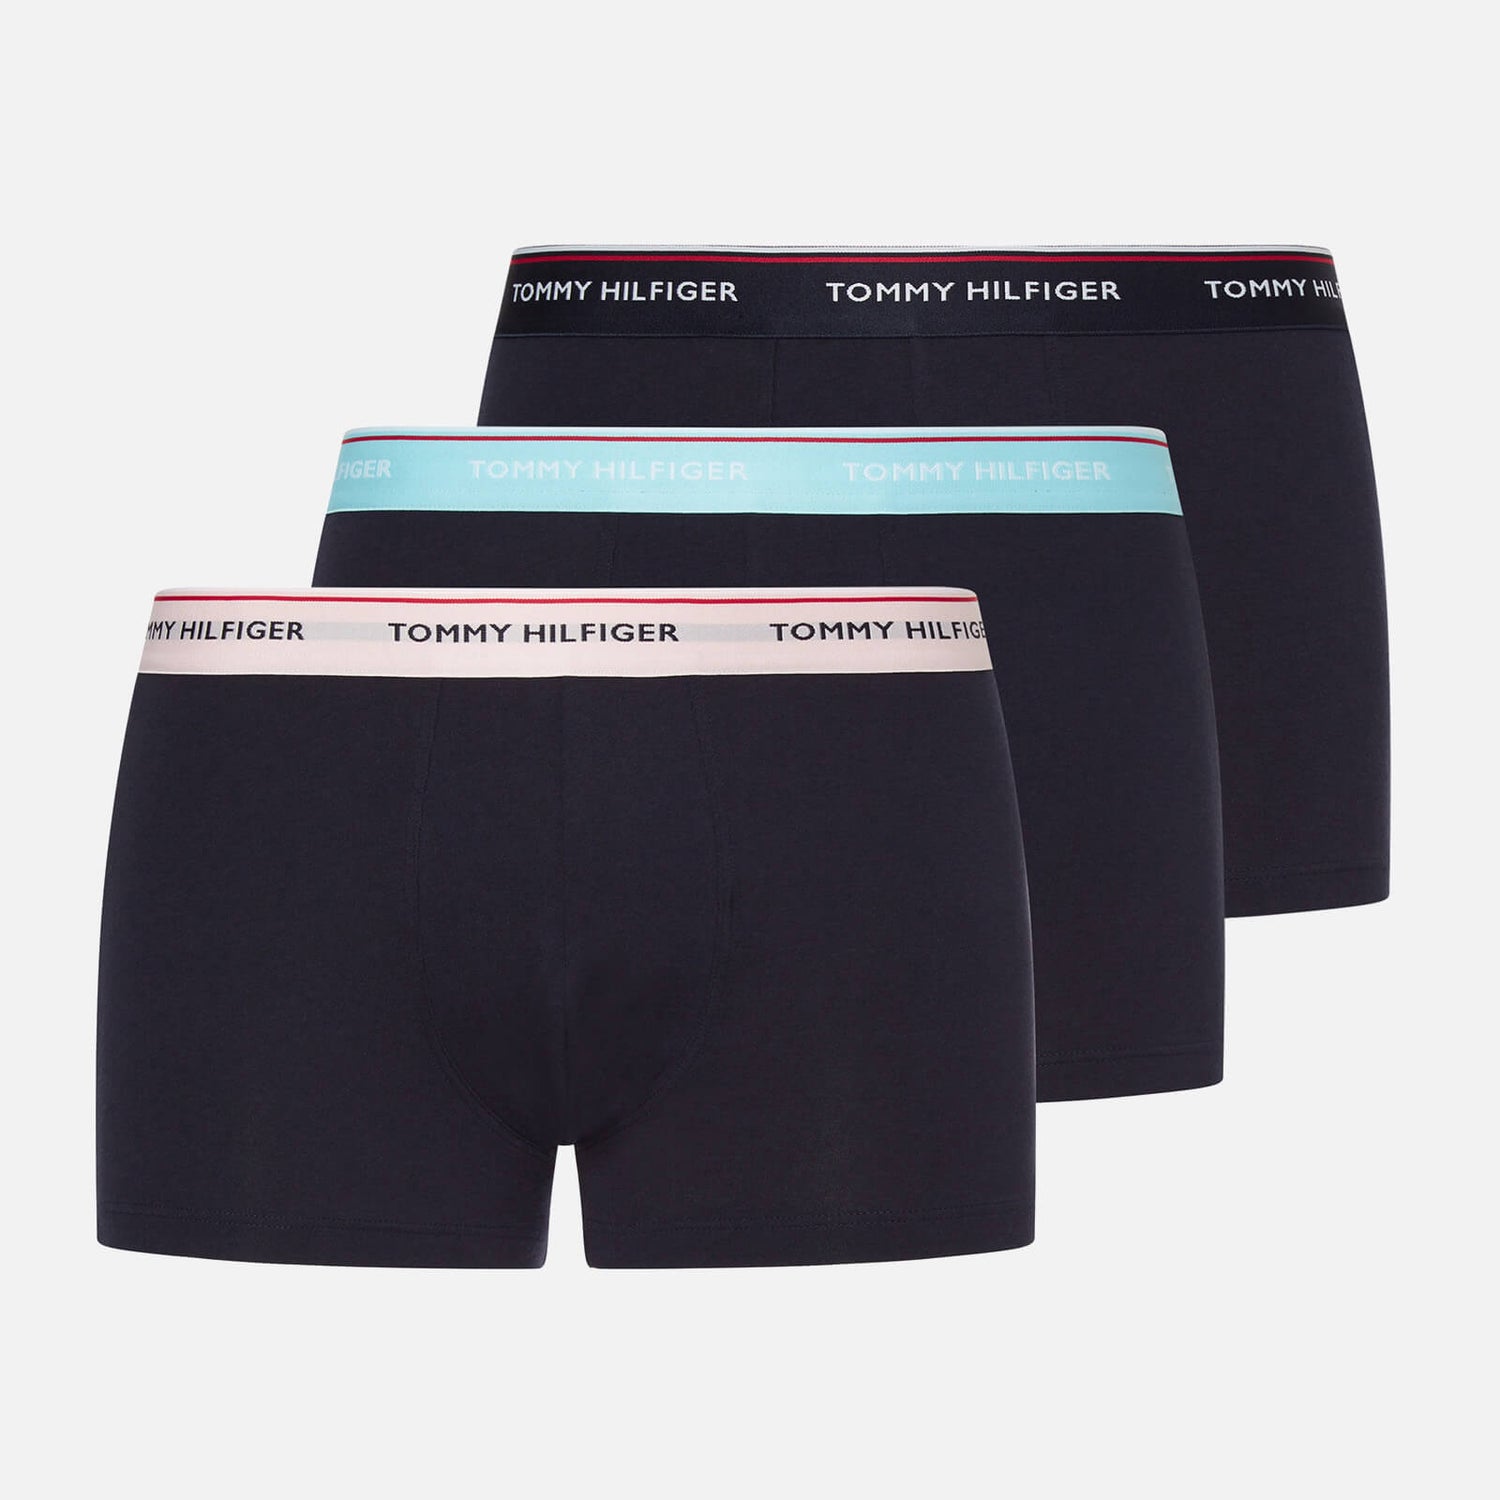 Tommy Hilfiger Men's 3-Pack Contrast Waistband Trunks - Desert Sky/Pale Pink/Cryo Ice - S